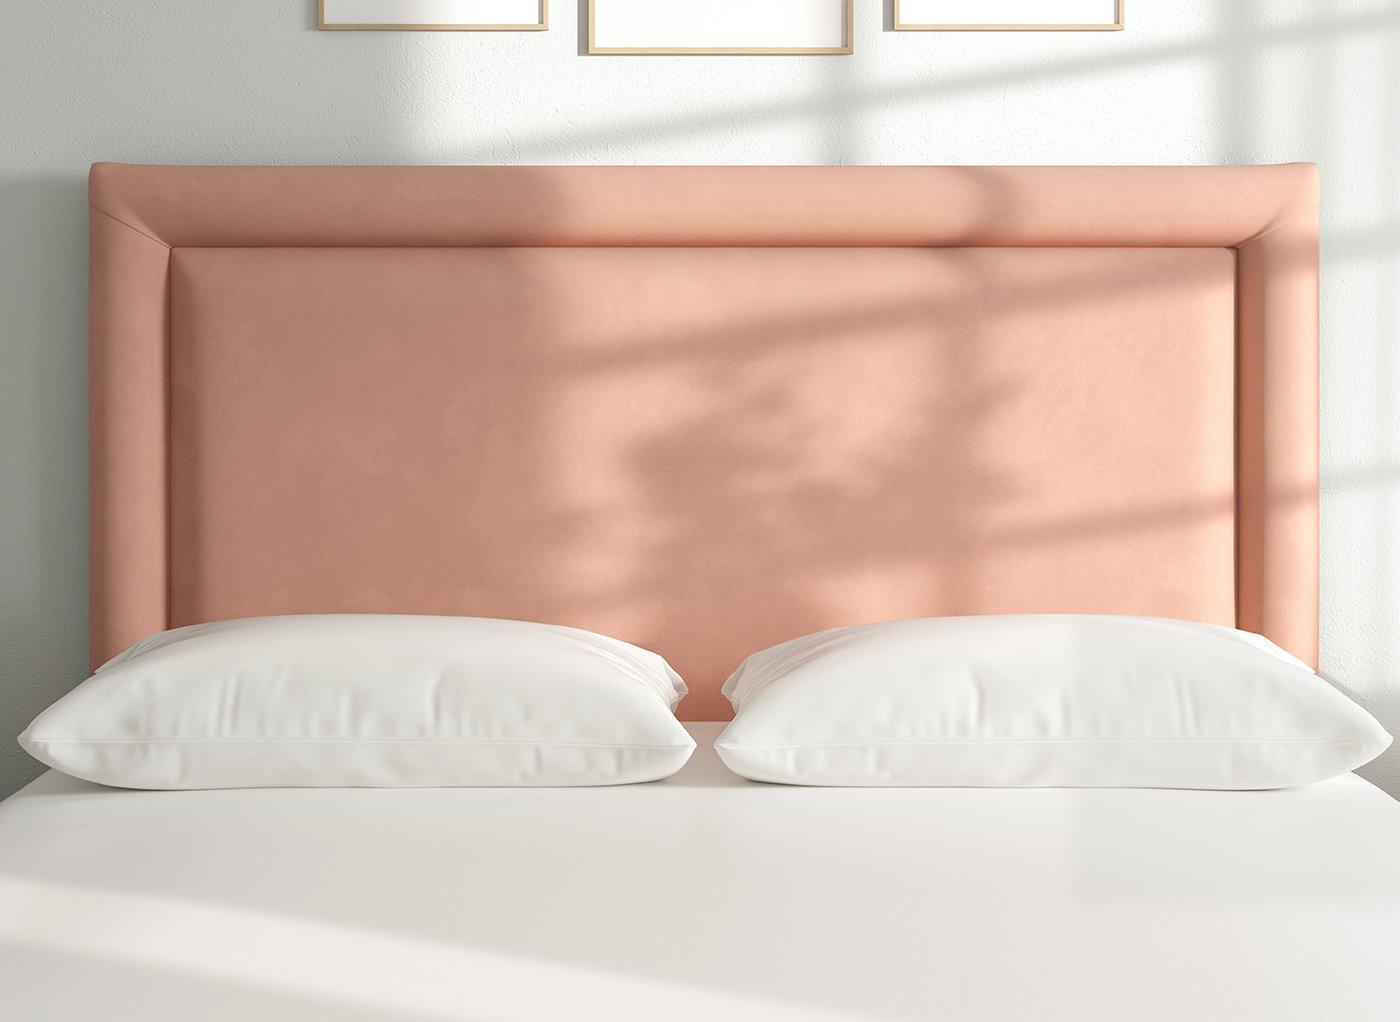 Blush Pink - Wall Hung Headboard Cushion with Leather Straps